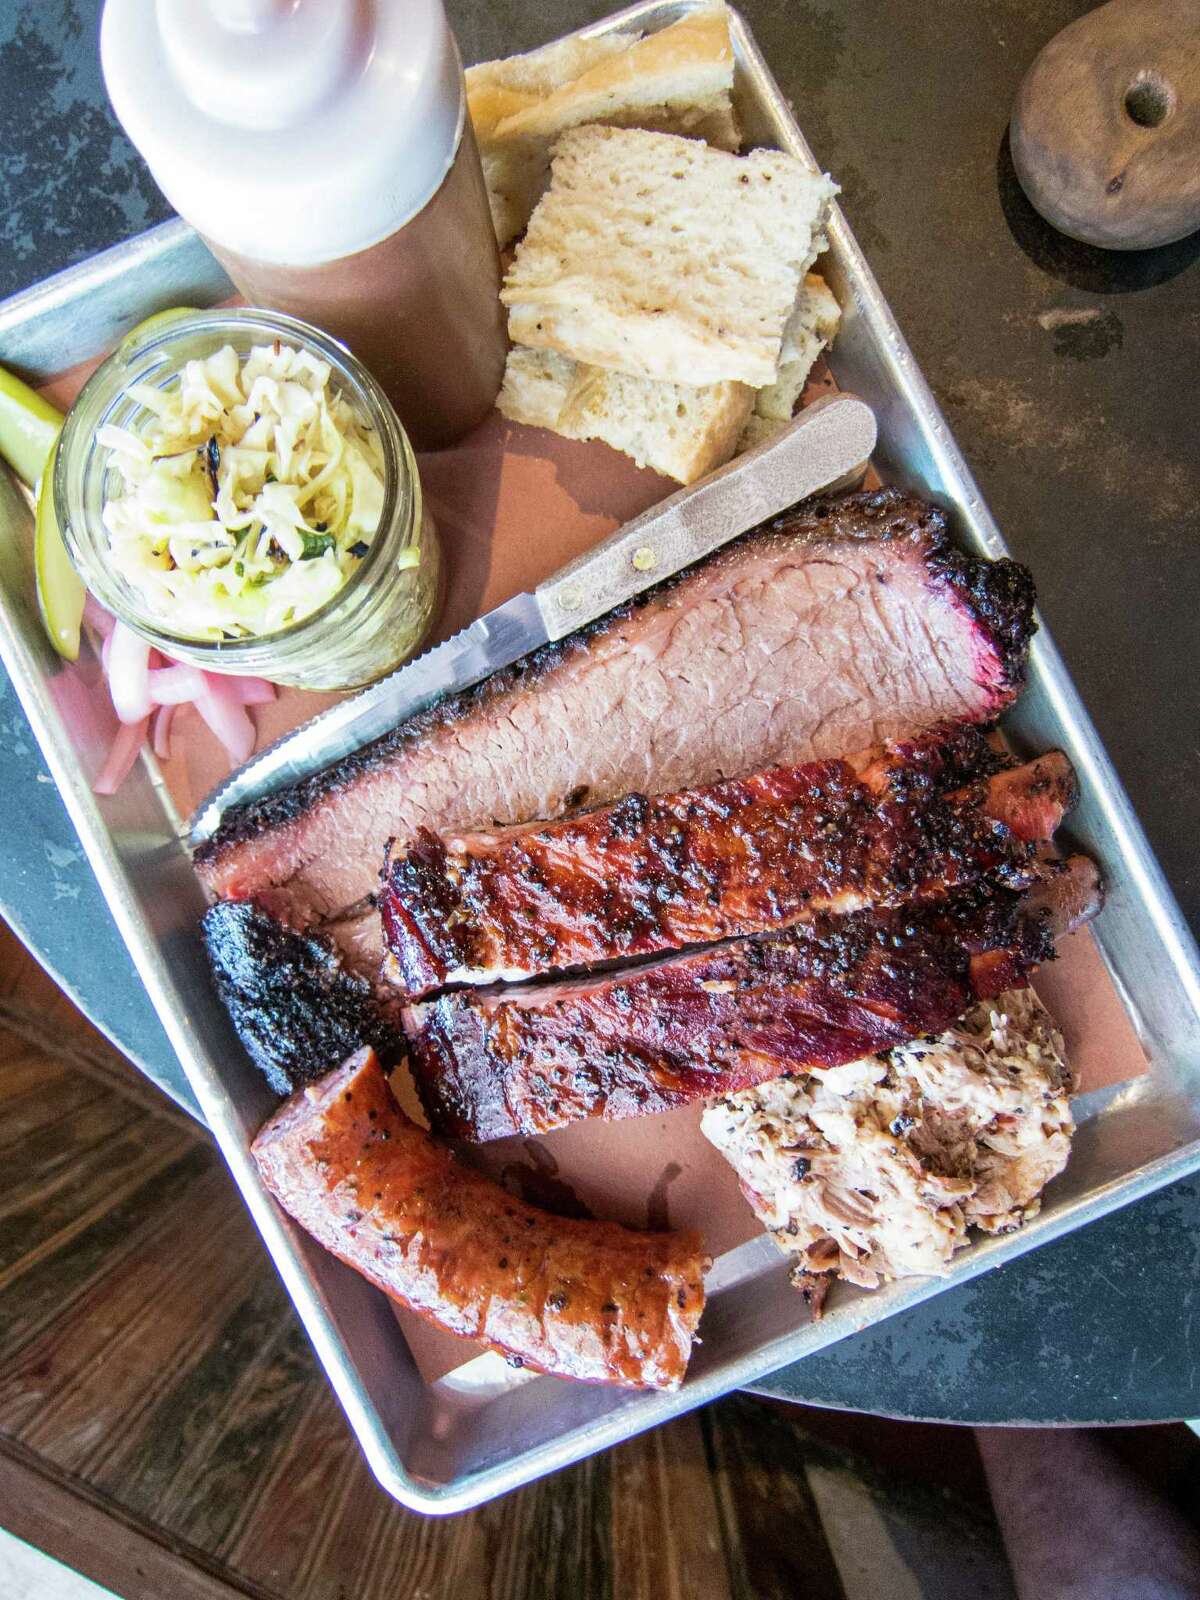 The "Holy Trinity Plate" - brisket, ribs, sausage - at Freedmen's Bar in Austin﻿.